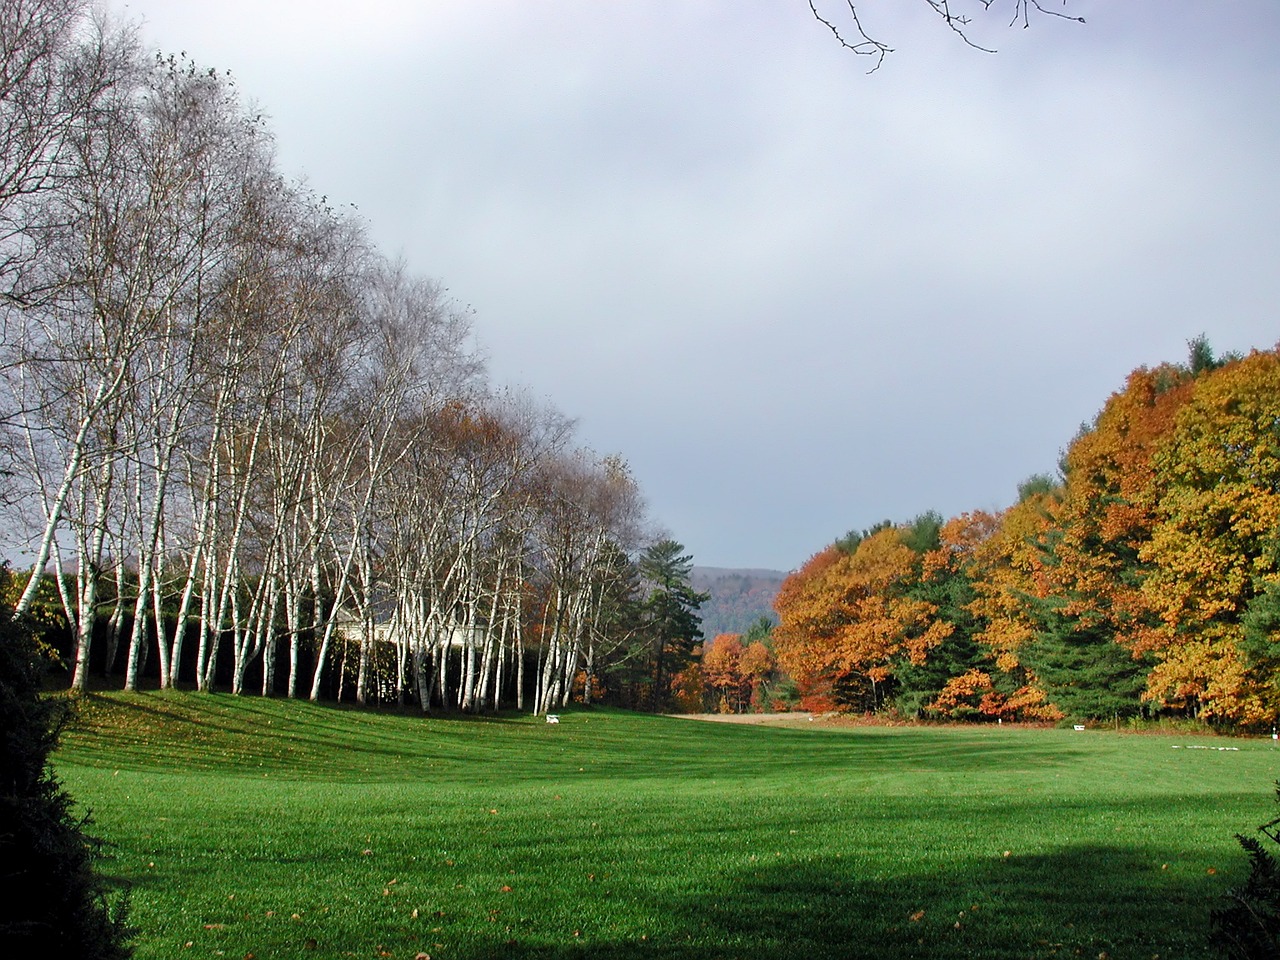 Landscape image of Cornish Colony, with a green pasture, lined by white birch trees on the left and on the right the trees have golden-turning fall-colored leaves.